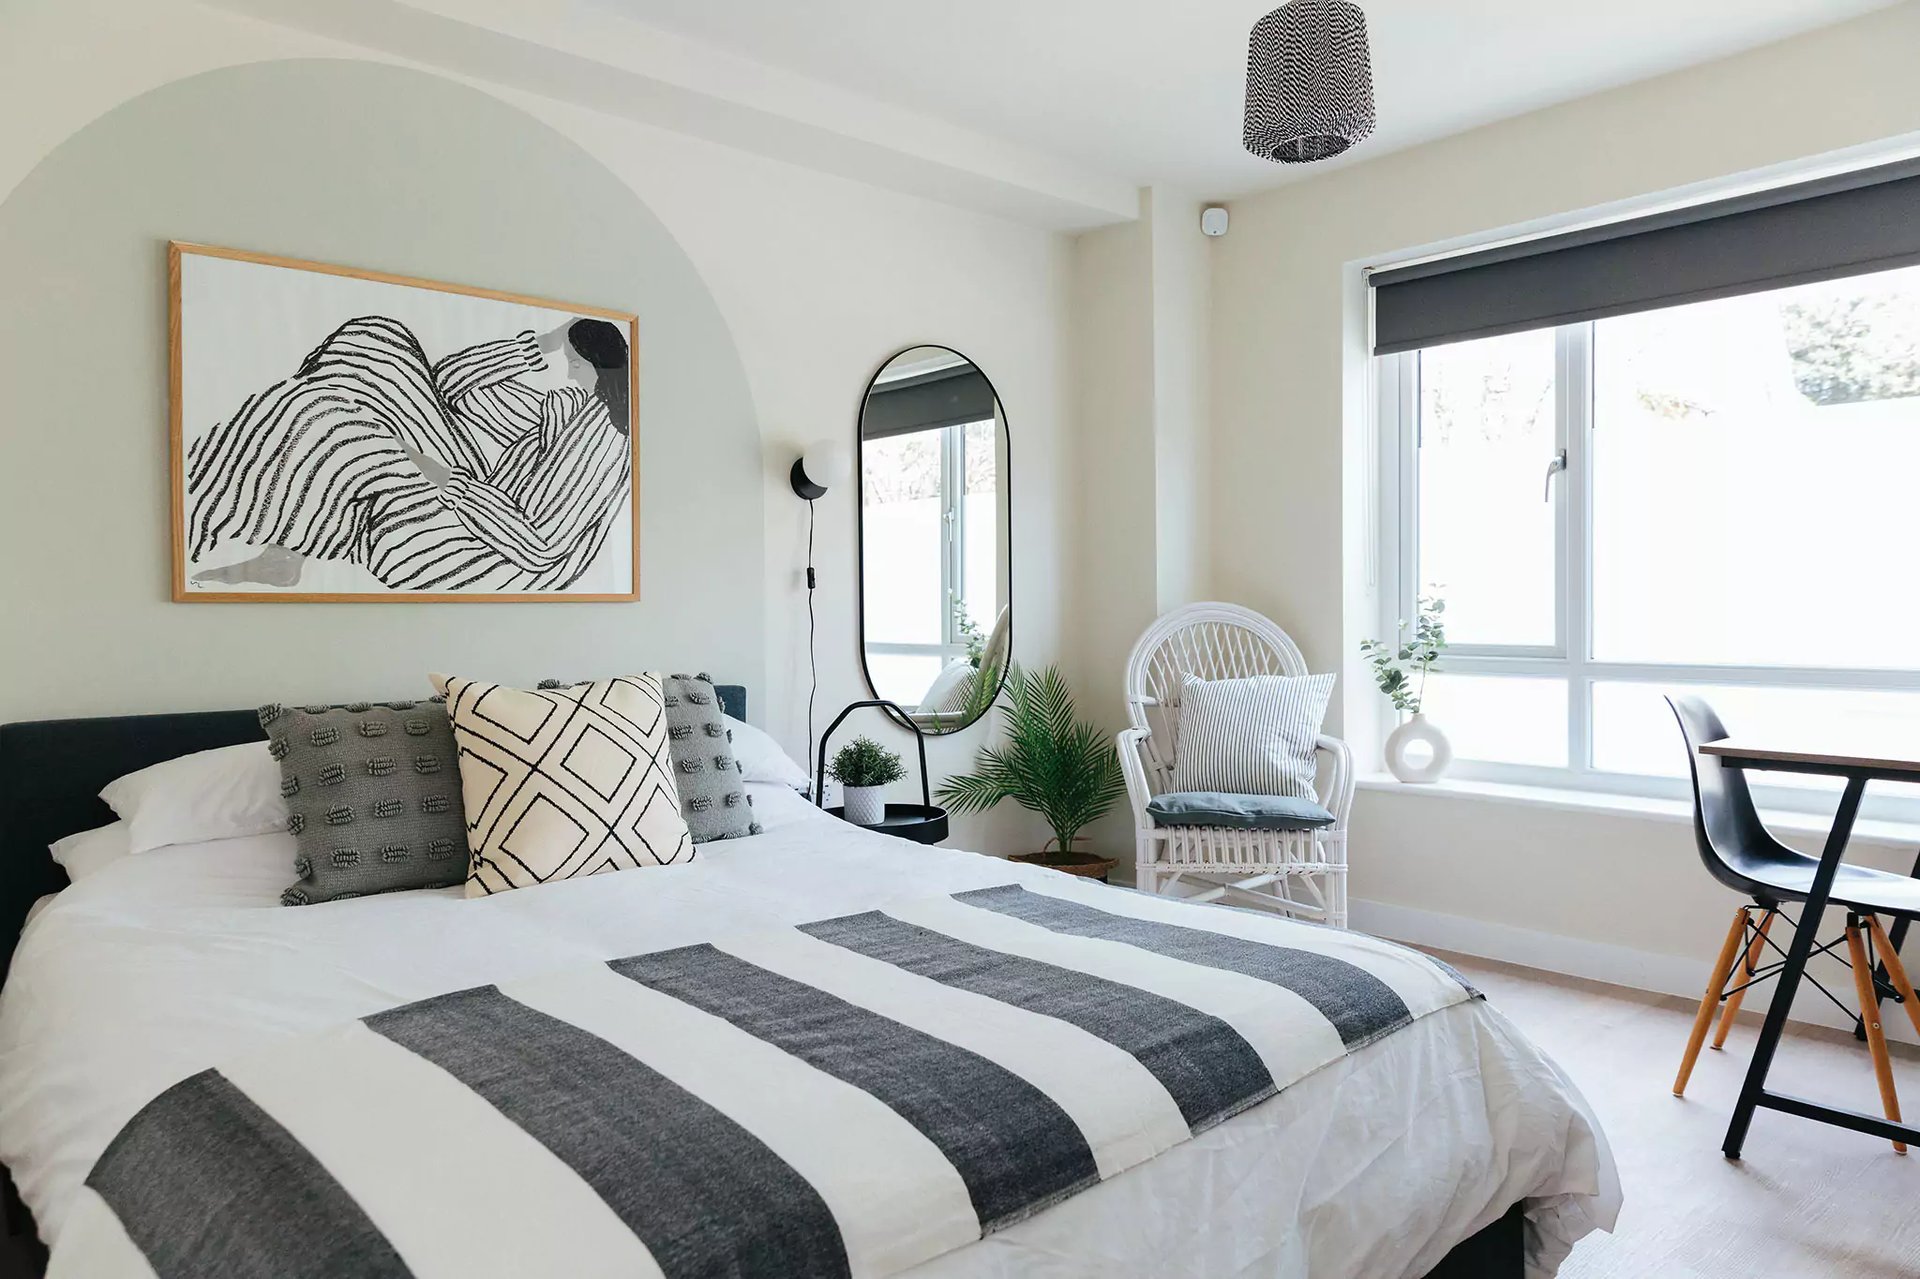 Bedroom with painted headboard and grey and white design